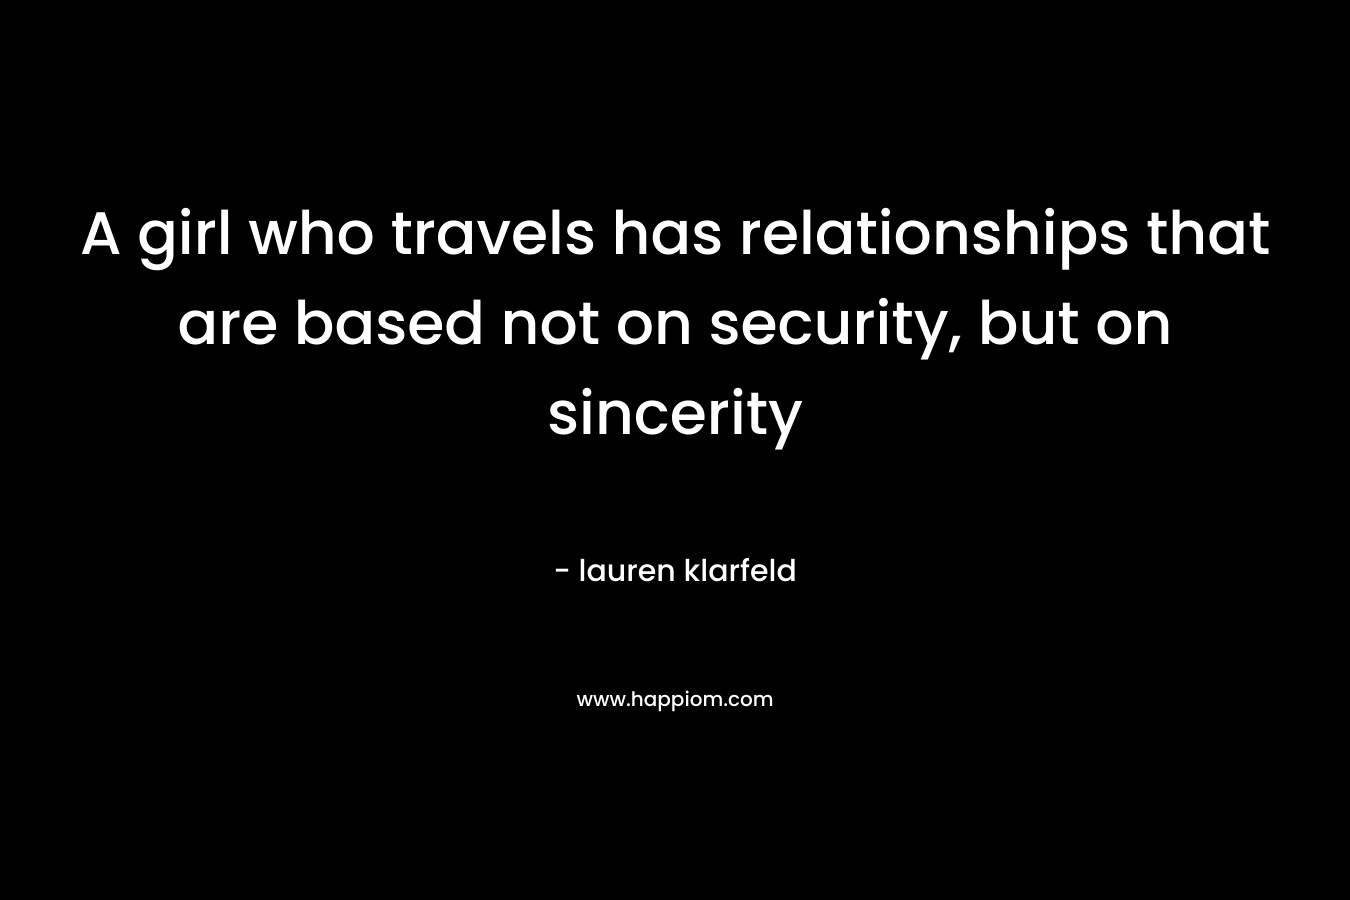 A girl who travels has relationships that are based not on security, but on sincerity